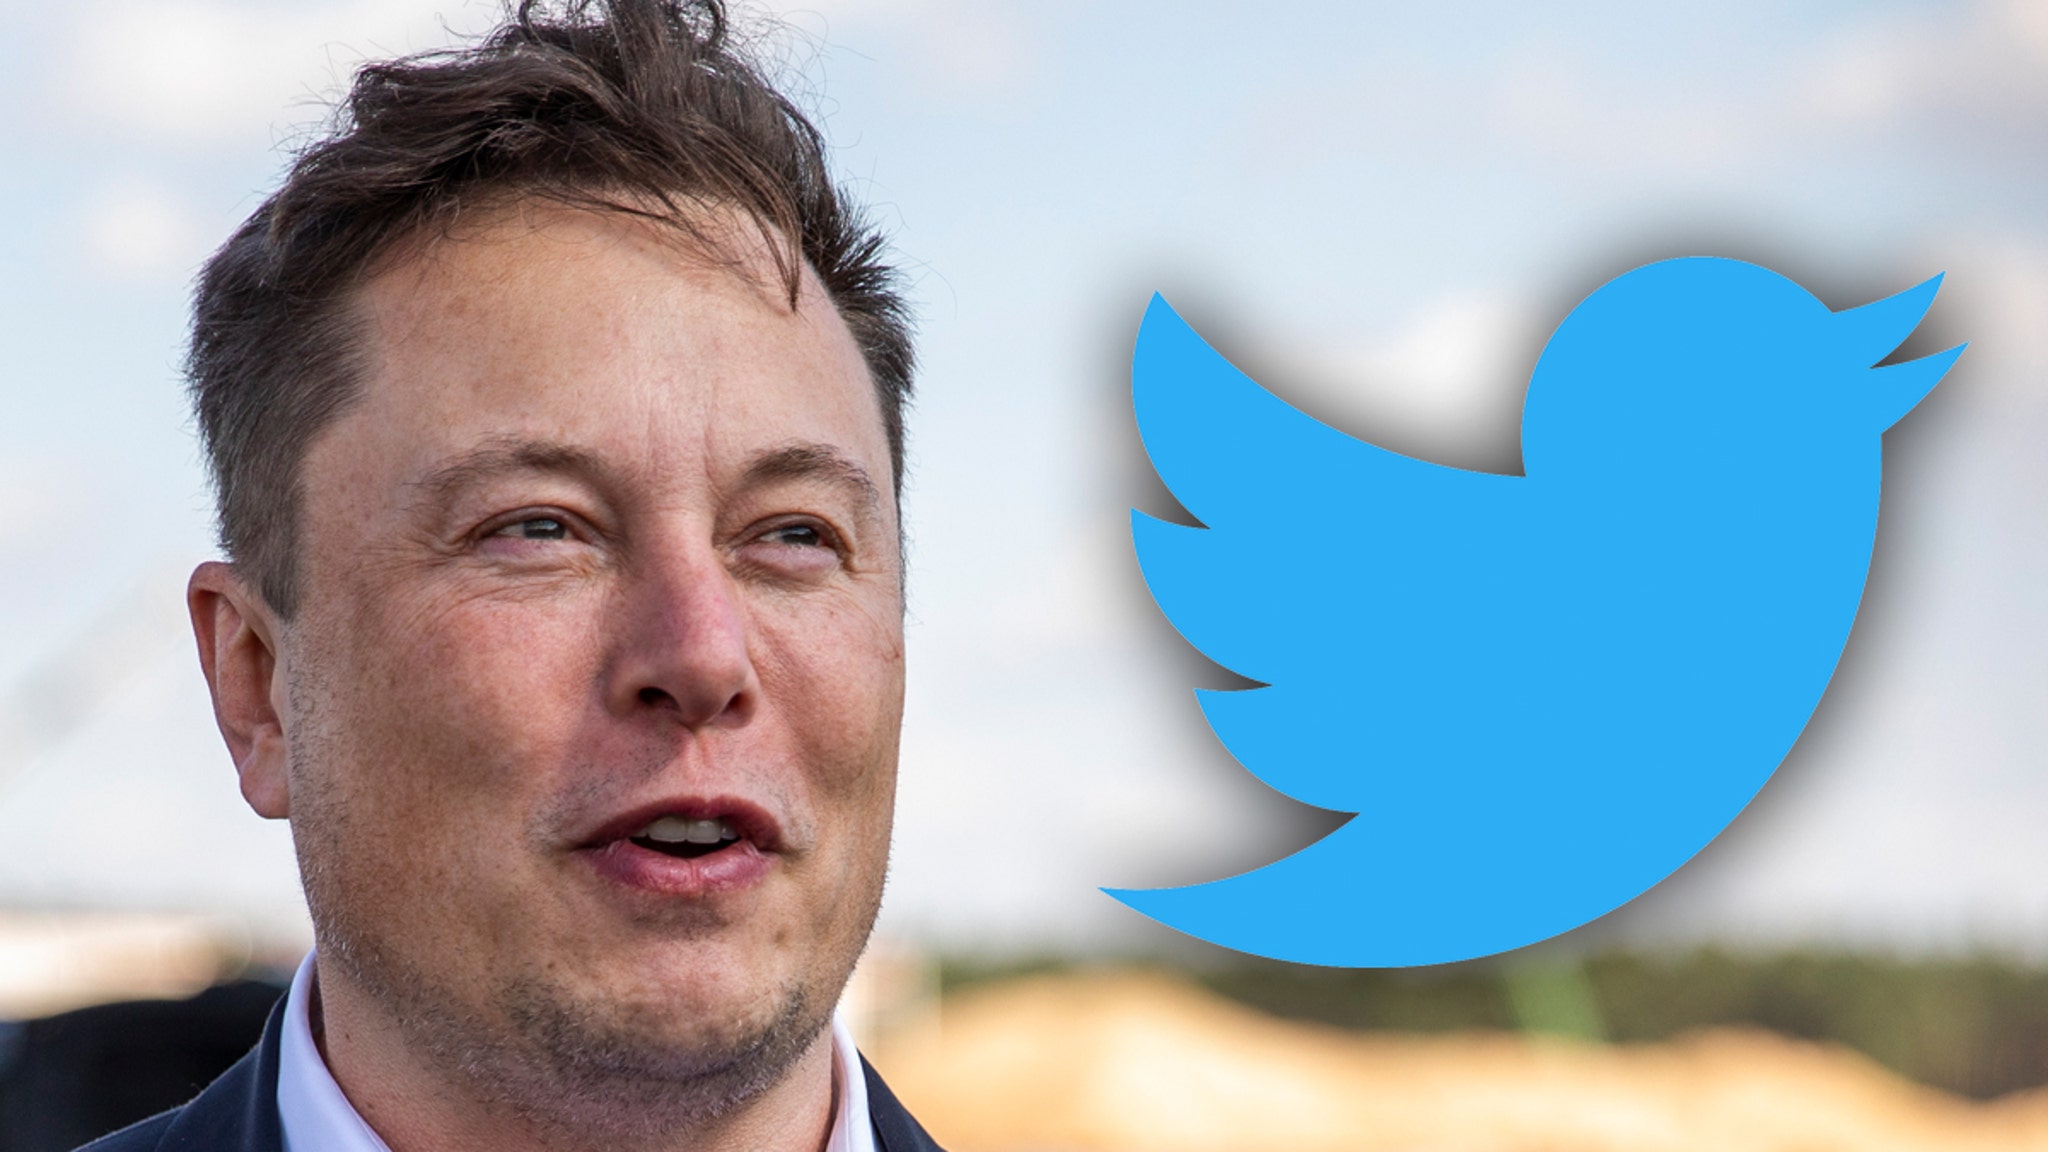 Twitter Meeting with Elon Musk to Discuss $43 Billion Buy-Out Proposal